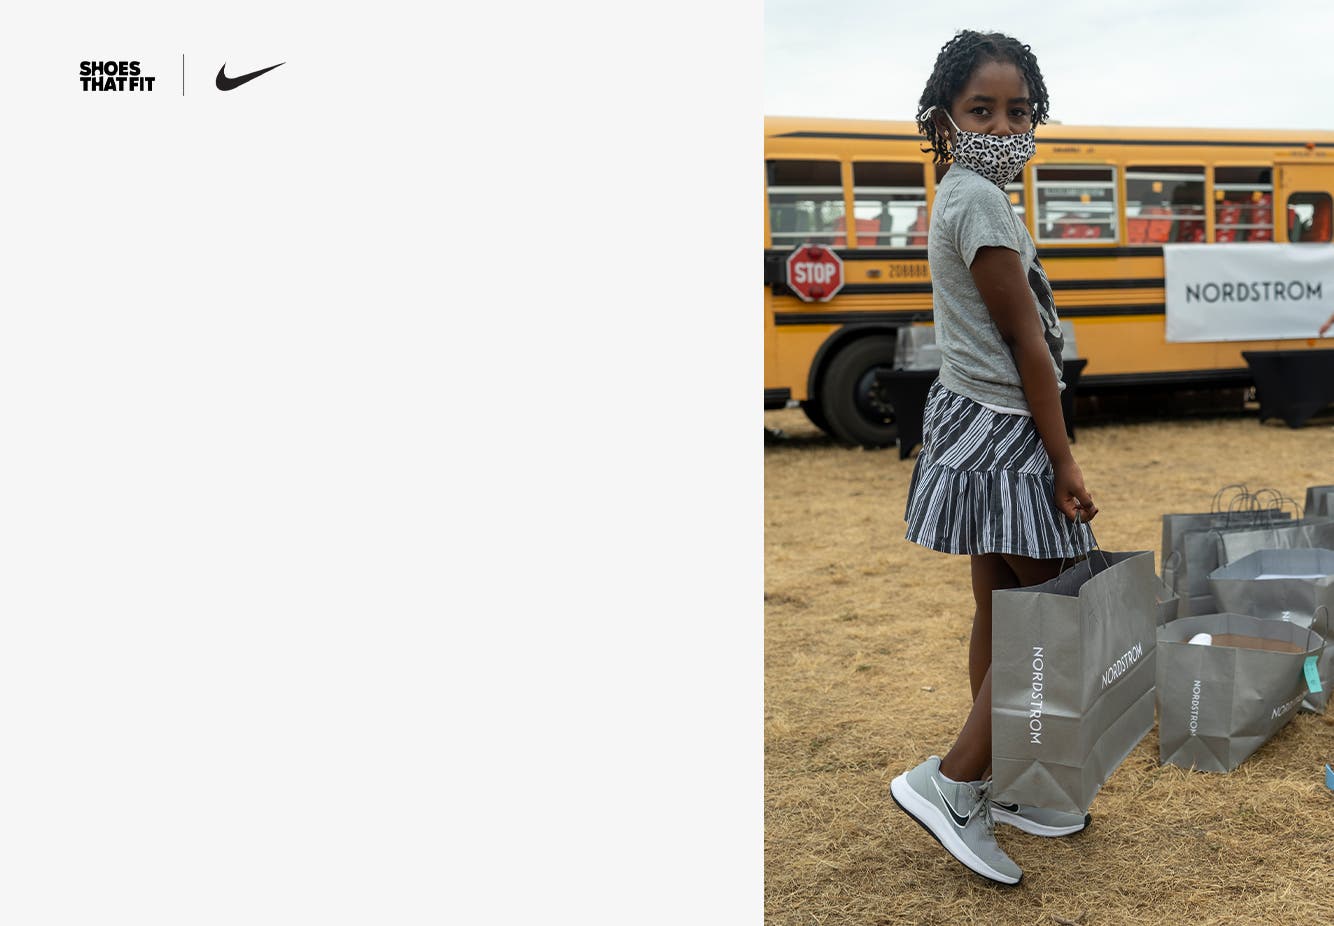 Kids with new shoes from Shoes That Fit, Nordstrom and Nike.